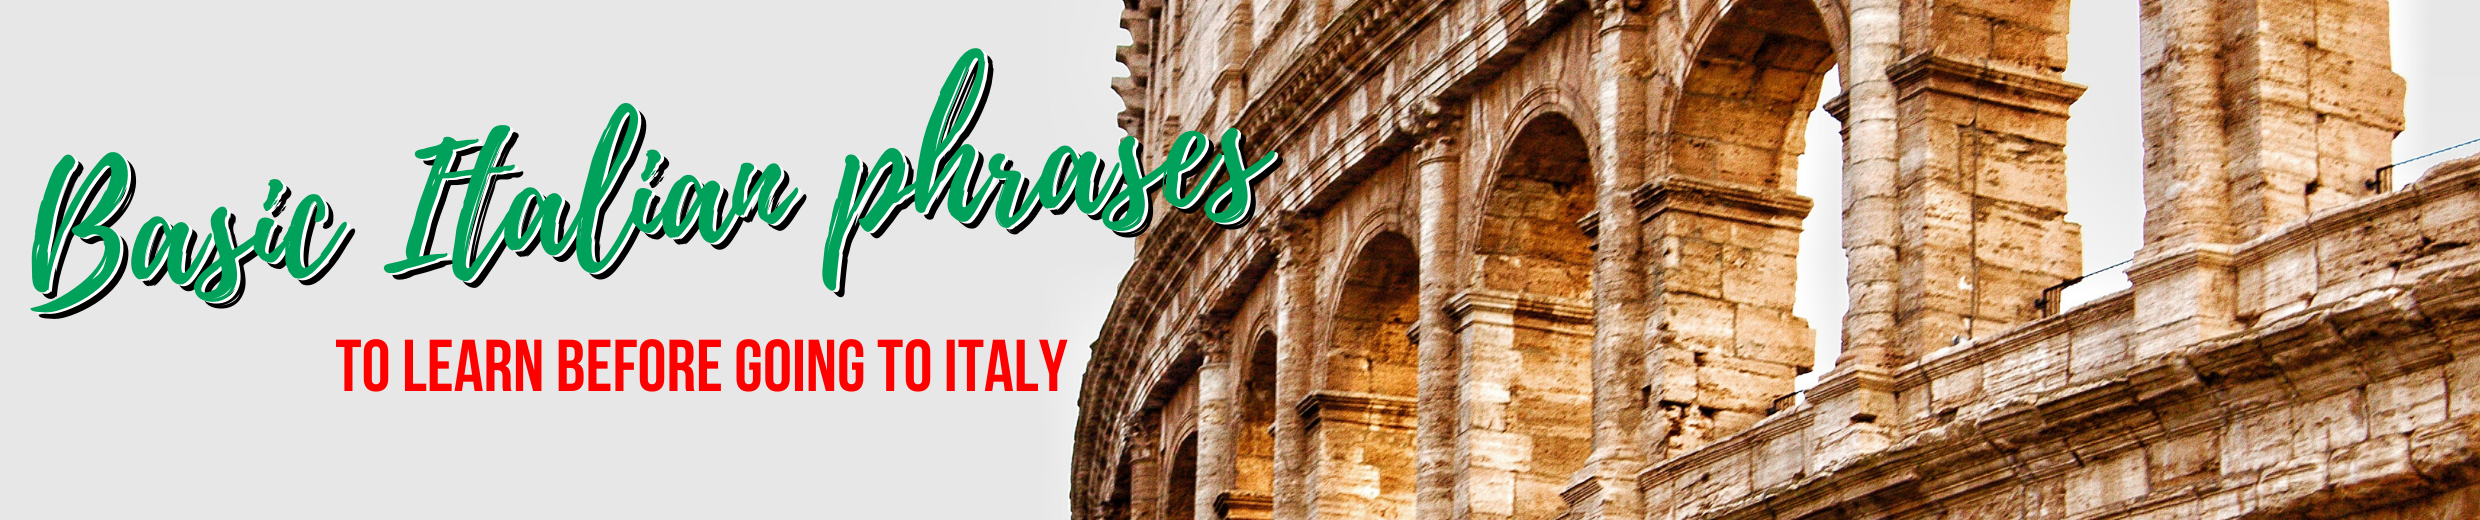 Italian phrases to learn before going to Italy